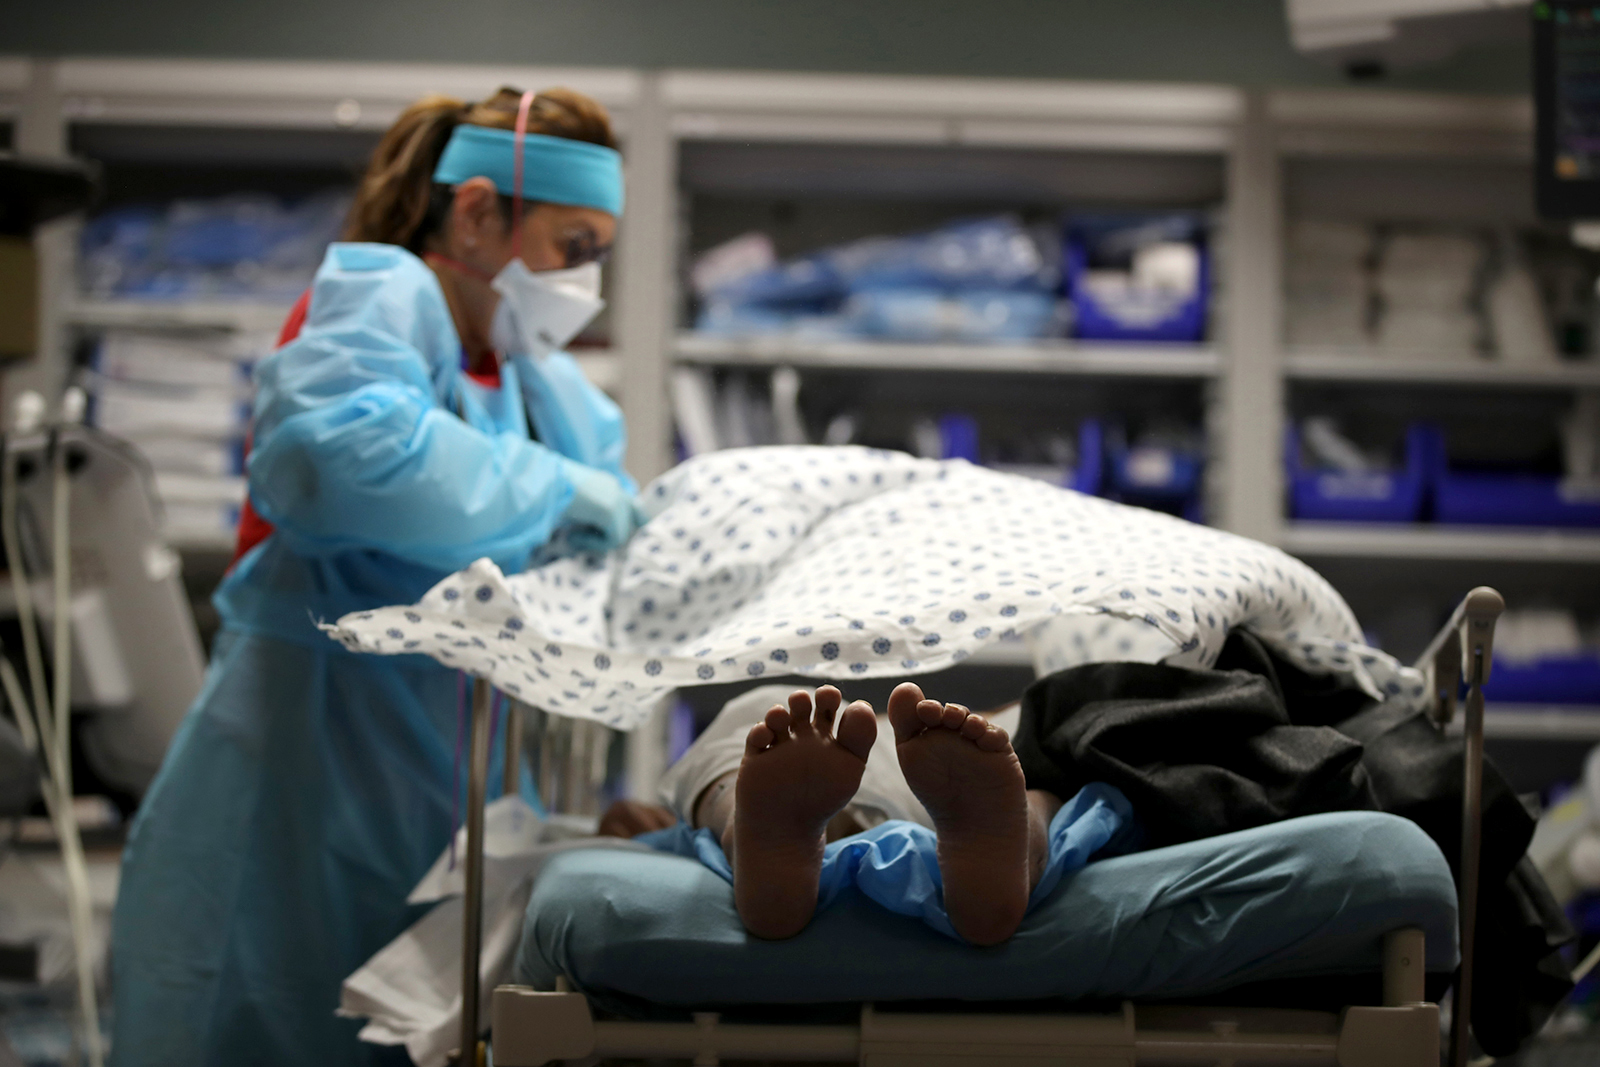 A nurse places a blanket over a patient that had just been admitted to the emergency room at Regional Medical Center in San Jose, California on May 21.